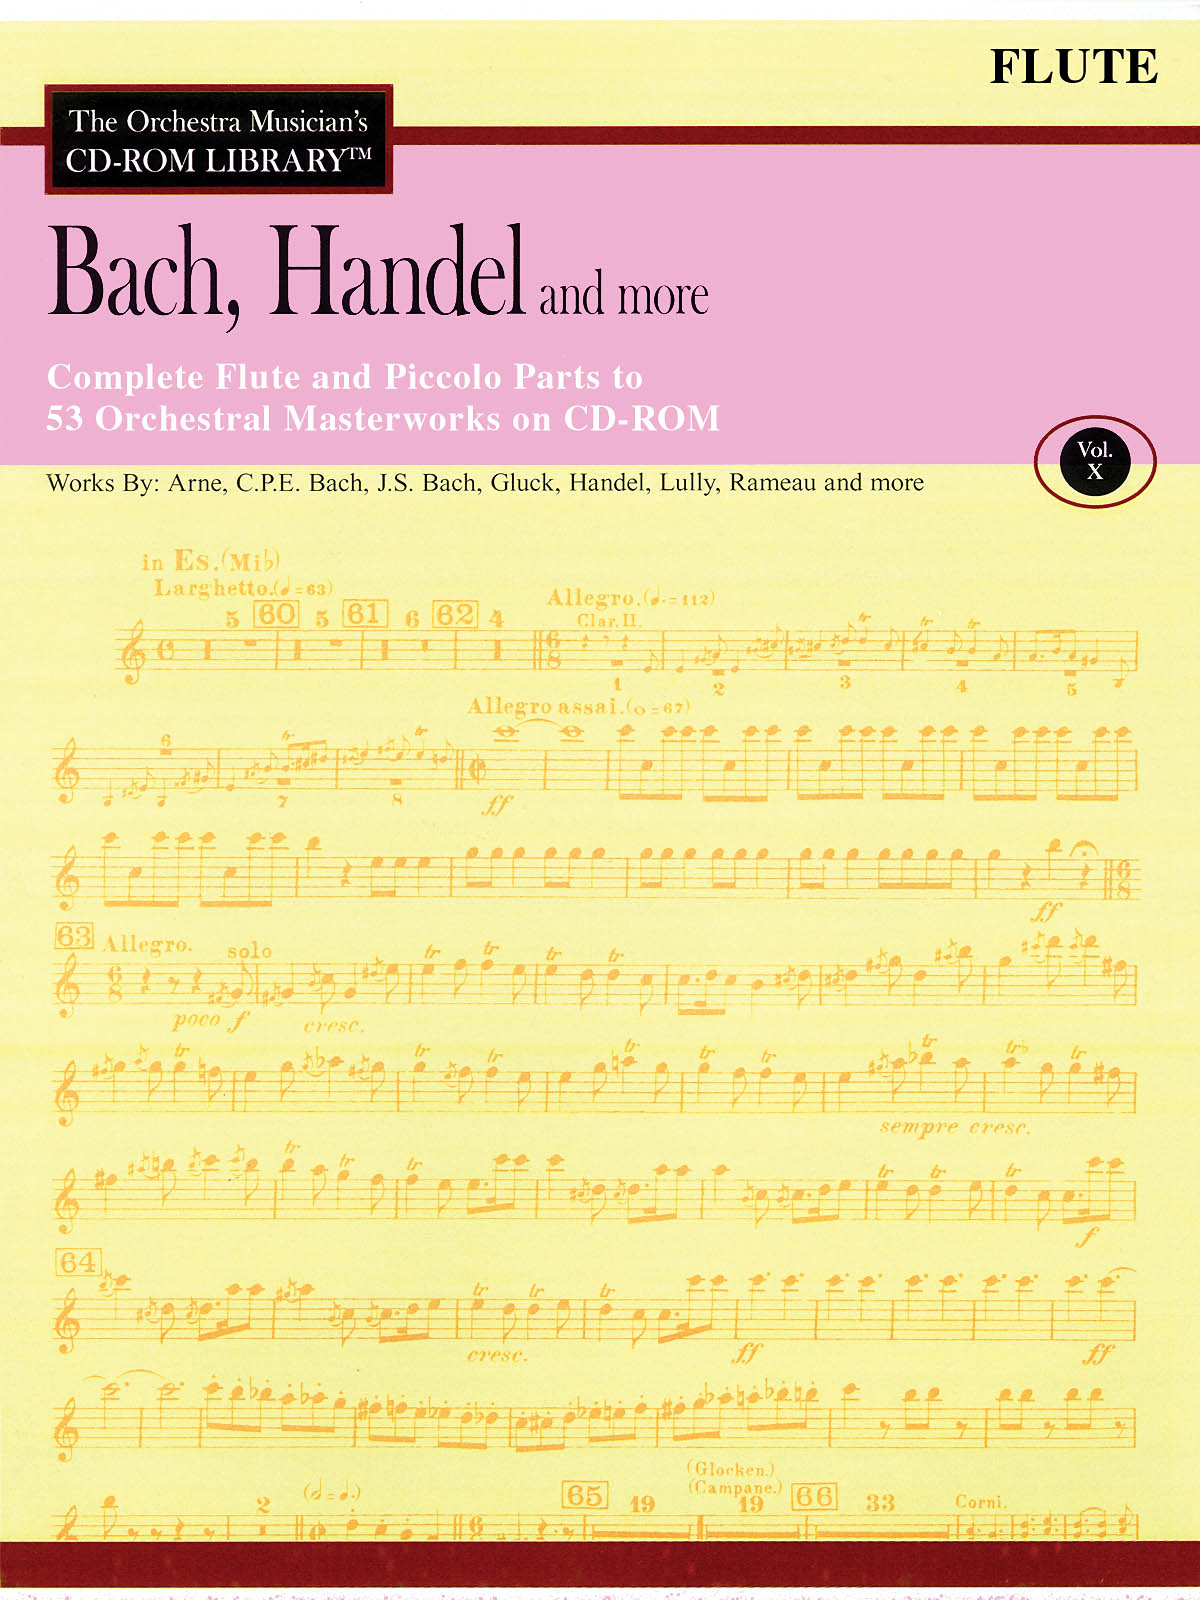 Bach, Handel and More – Volume 10(The Orchestra Musician’s CD-ROM Library – Flute)